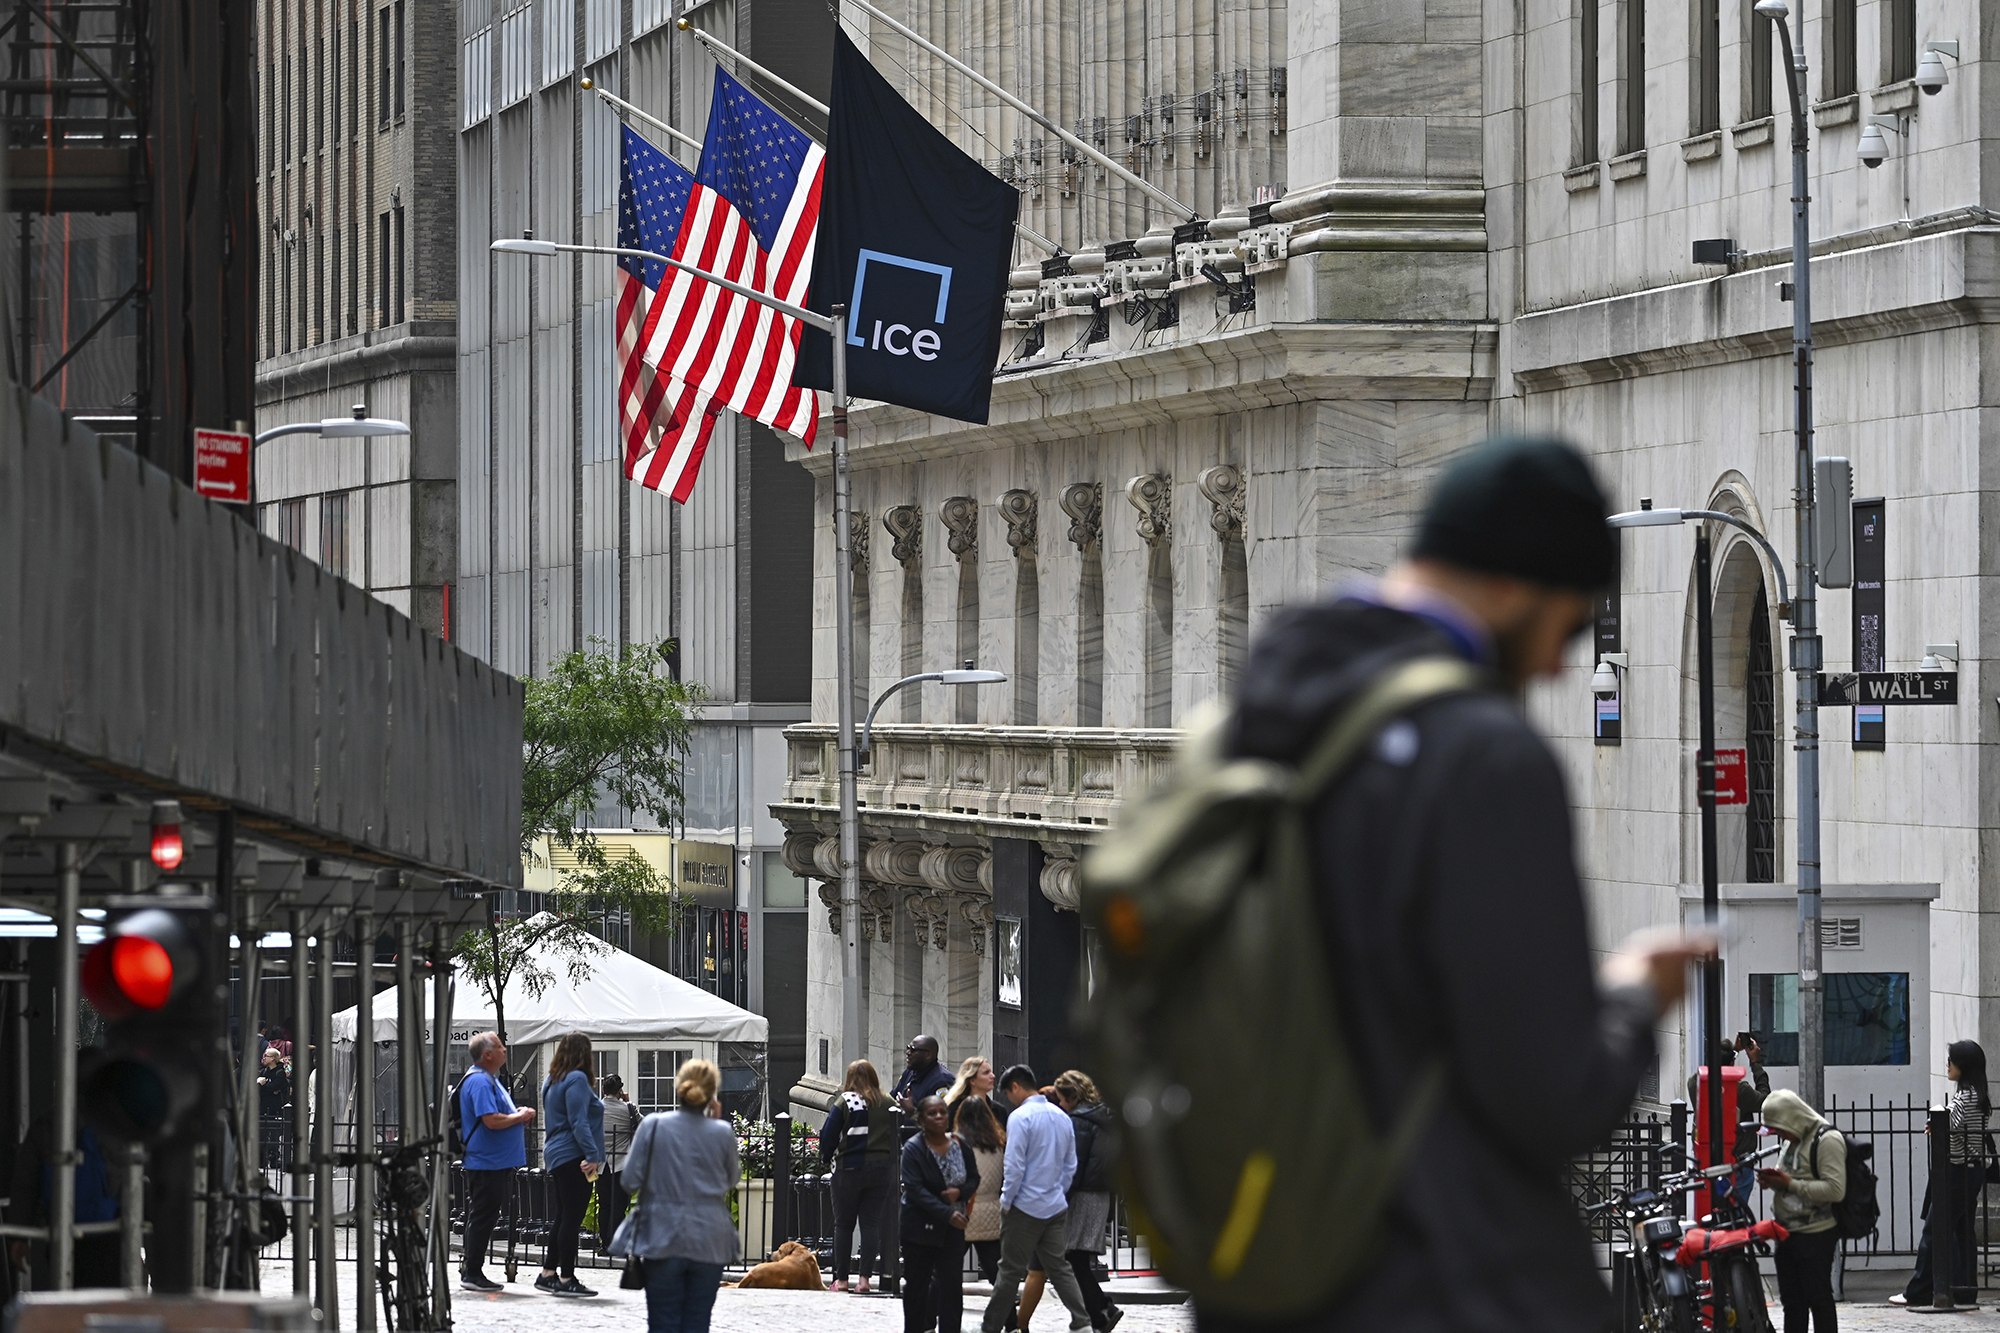 People walk past the New York Stock Exchange on Wall Street on September 27 in New York City.